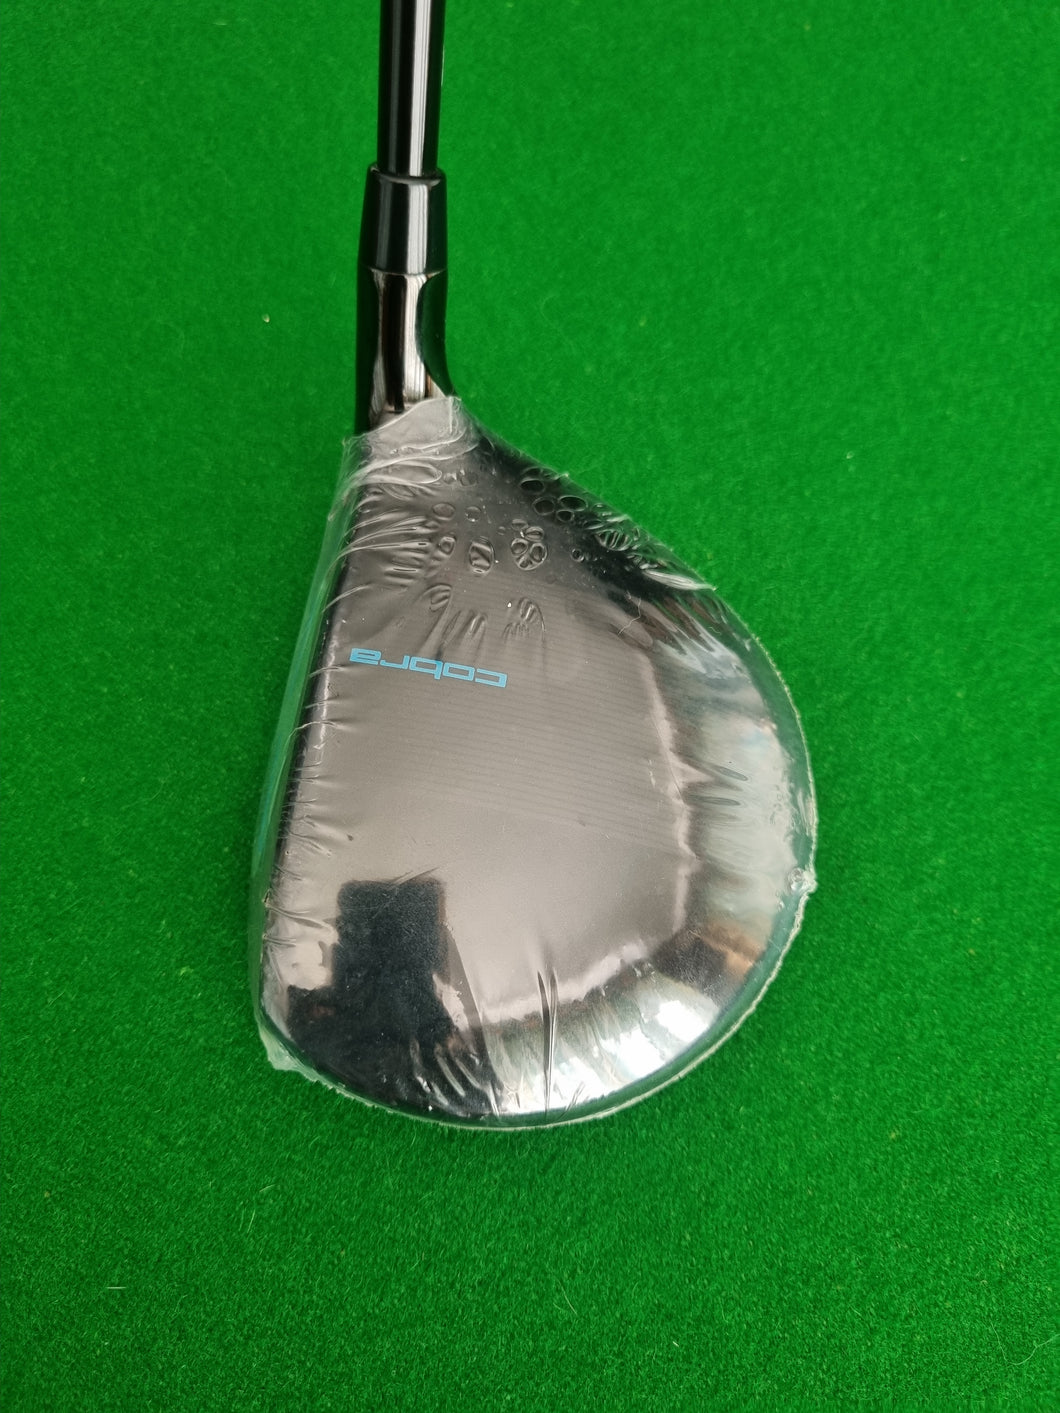 New Cobra F-MAX Ladies 3 Wood LH 19° with Cover - New